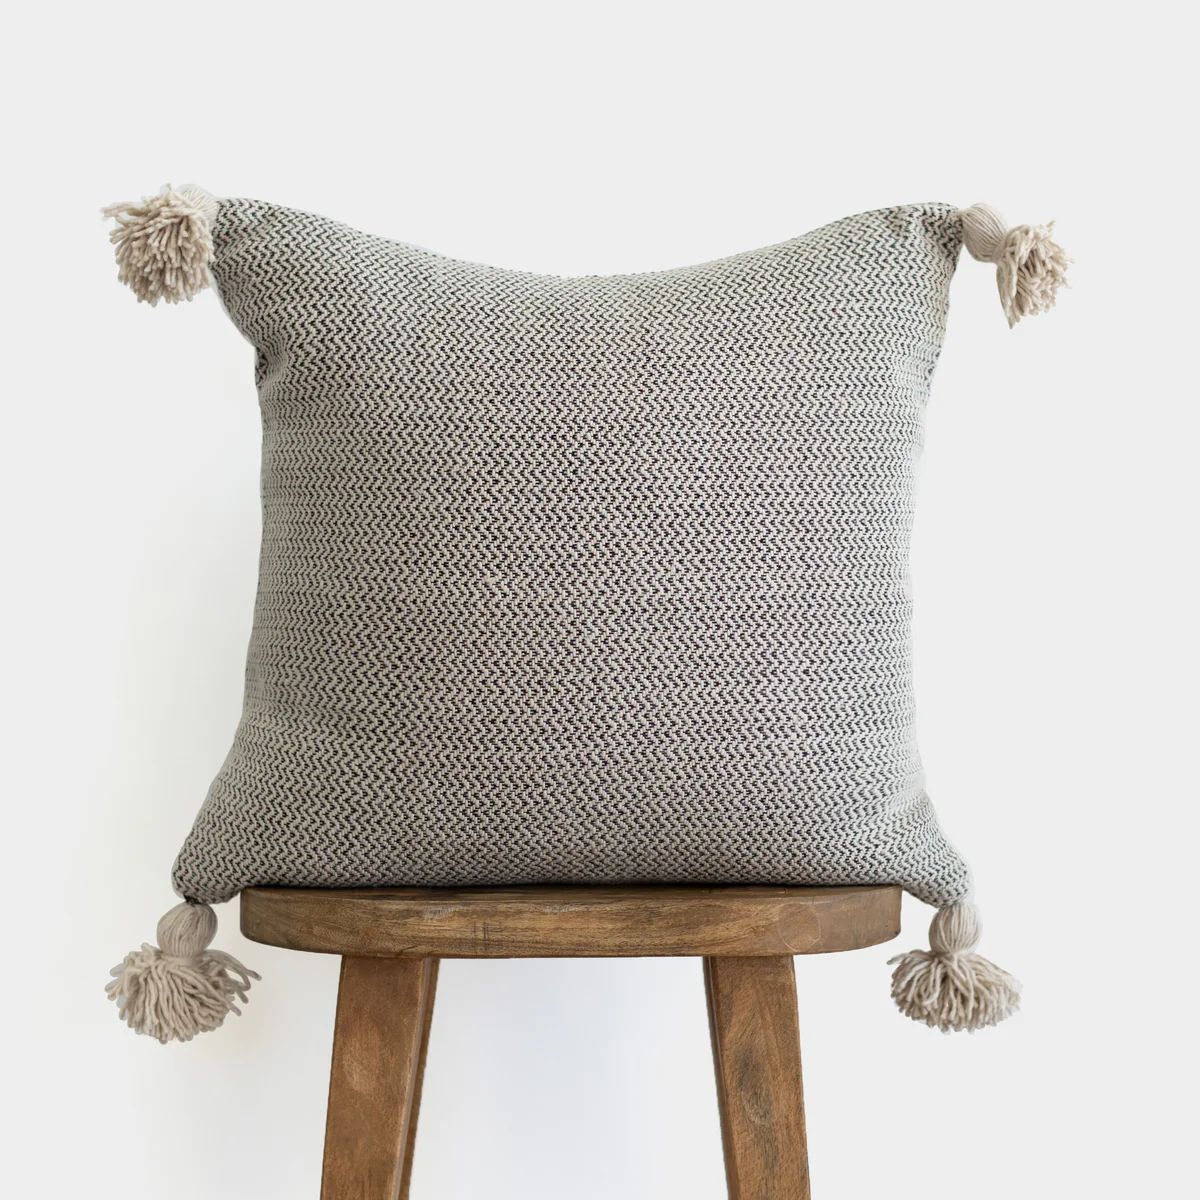 Tweed in Cream - 22" Moroccan Pillow Cover | Woven Nook